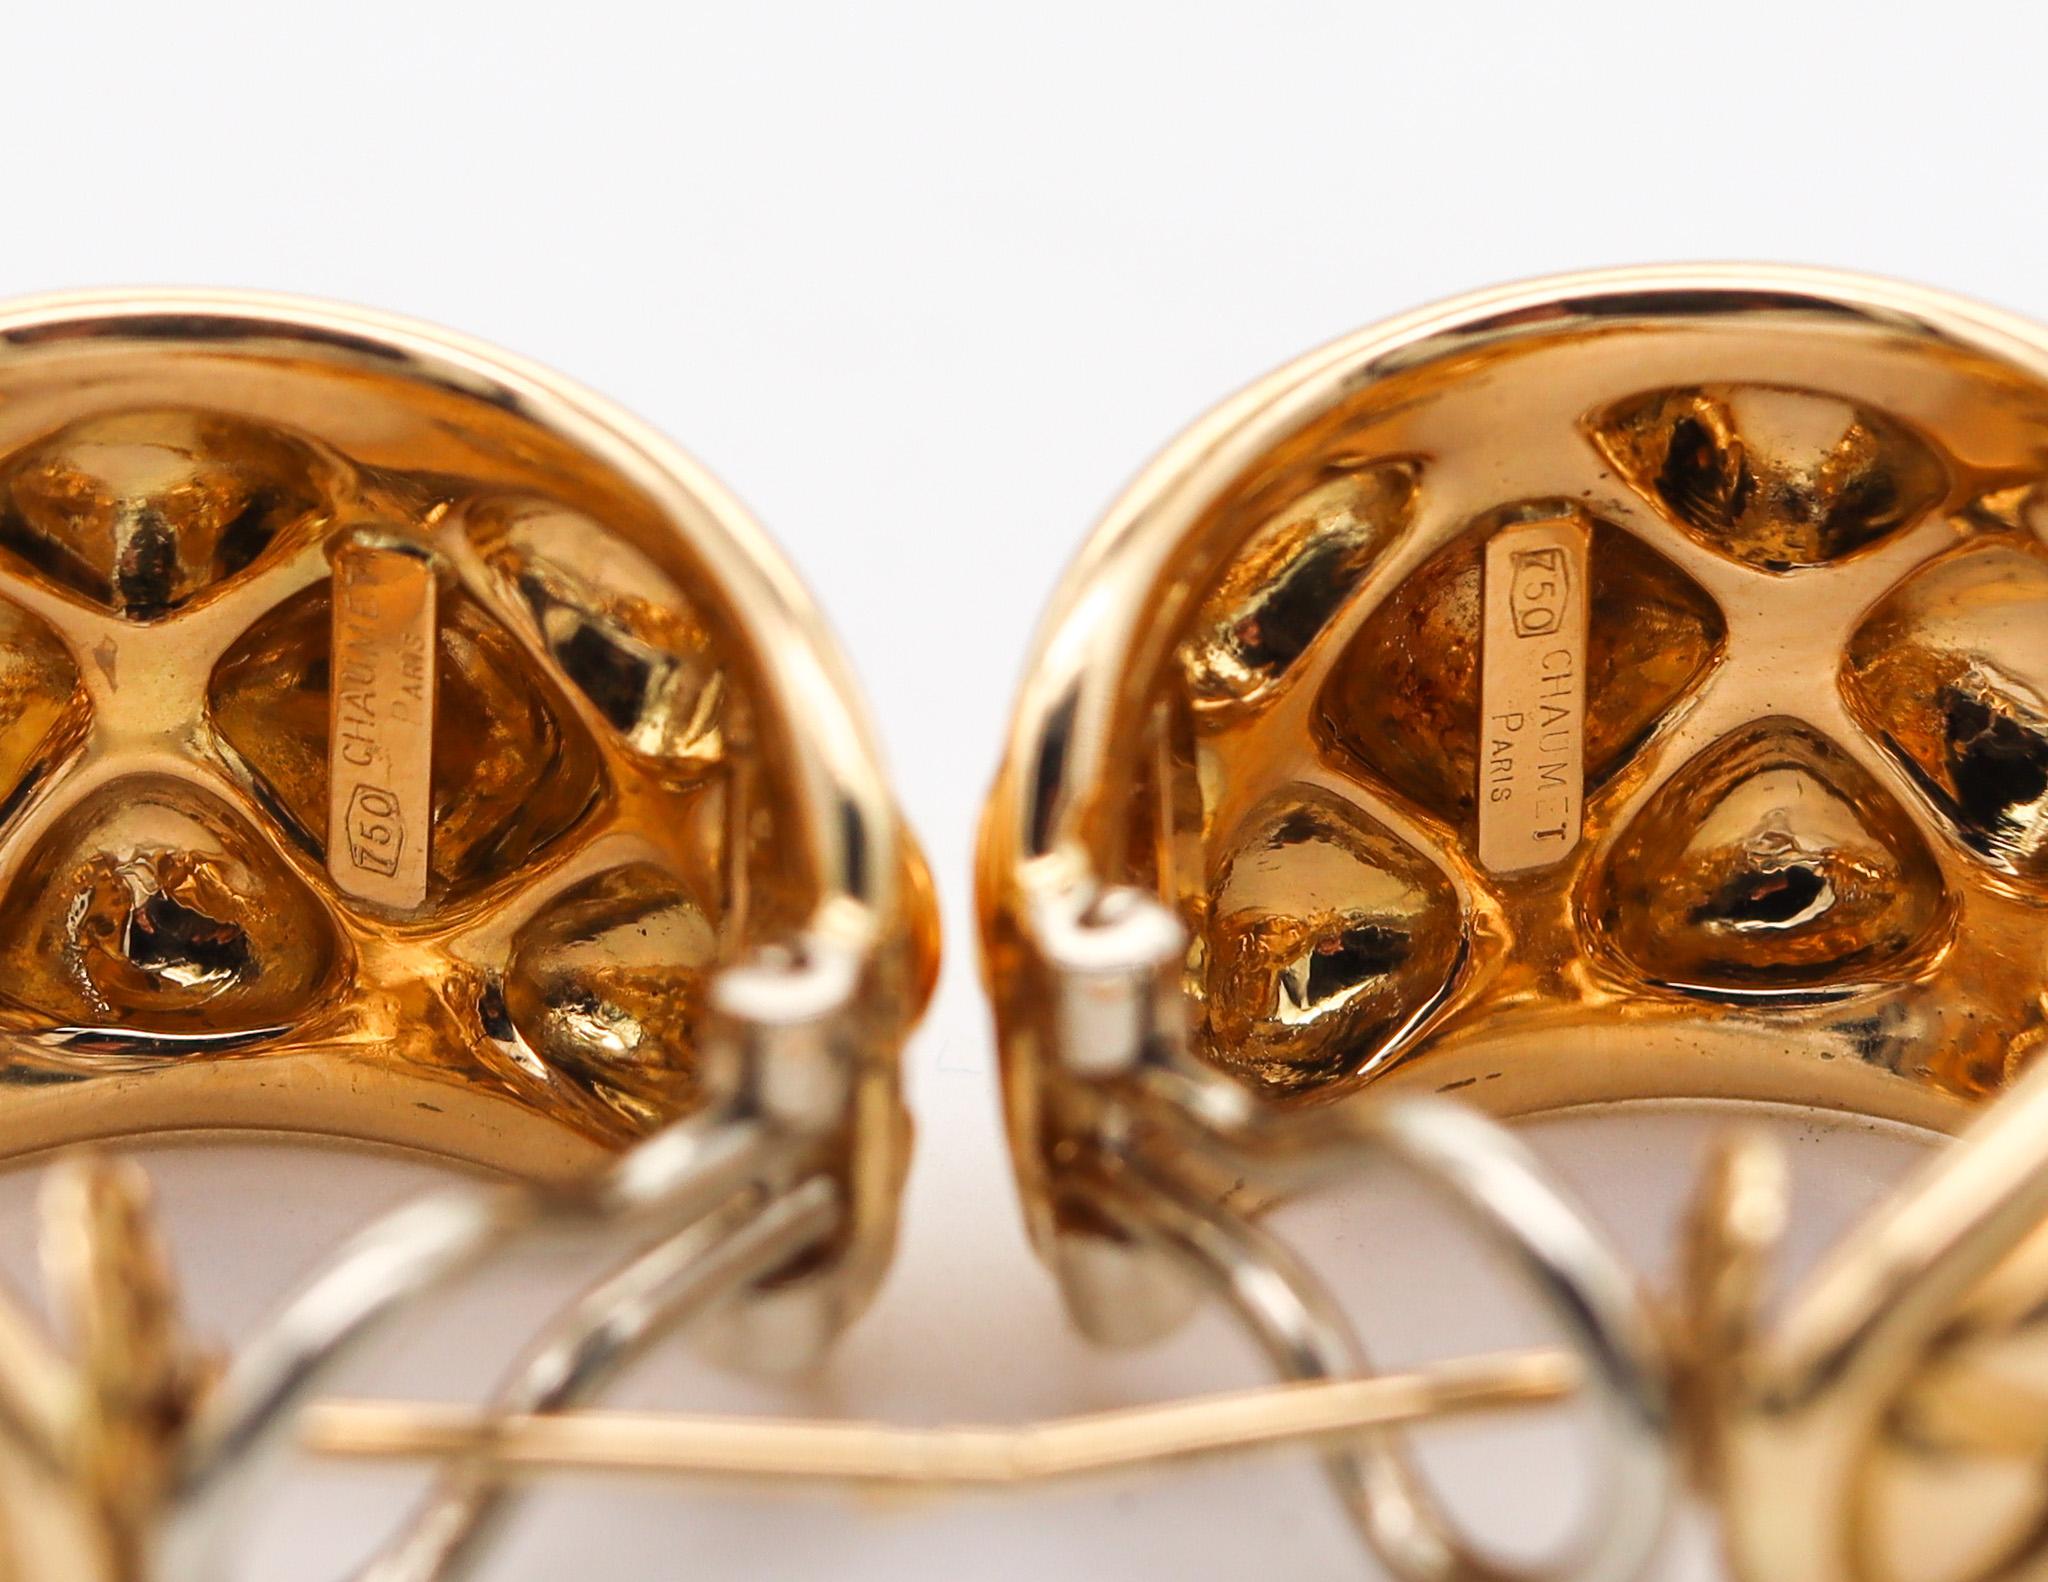 Chaumet Paris 1970 Quilted Modernist Hoops Earrings in Solid 18kt Yellow Gold In Excellent Condition For Sale In Miami, FL